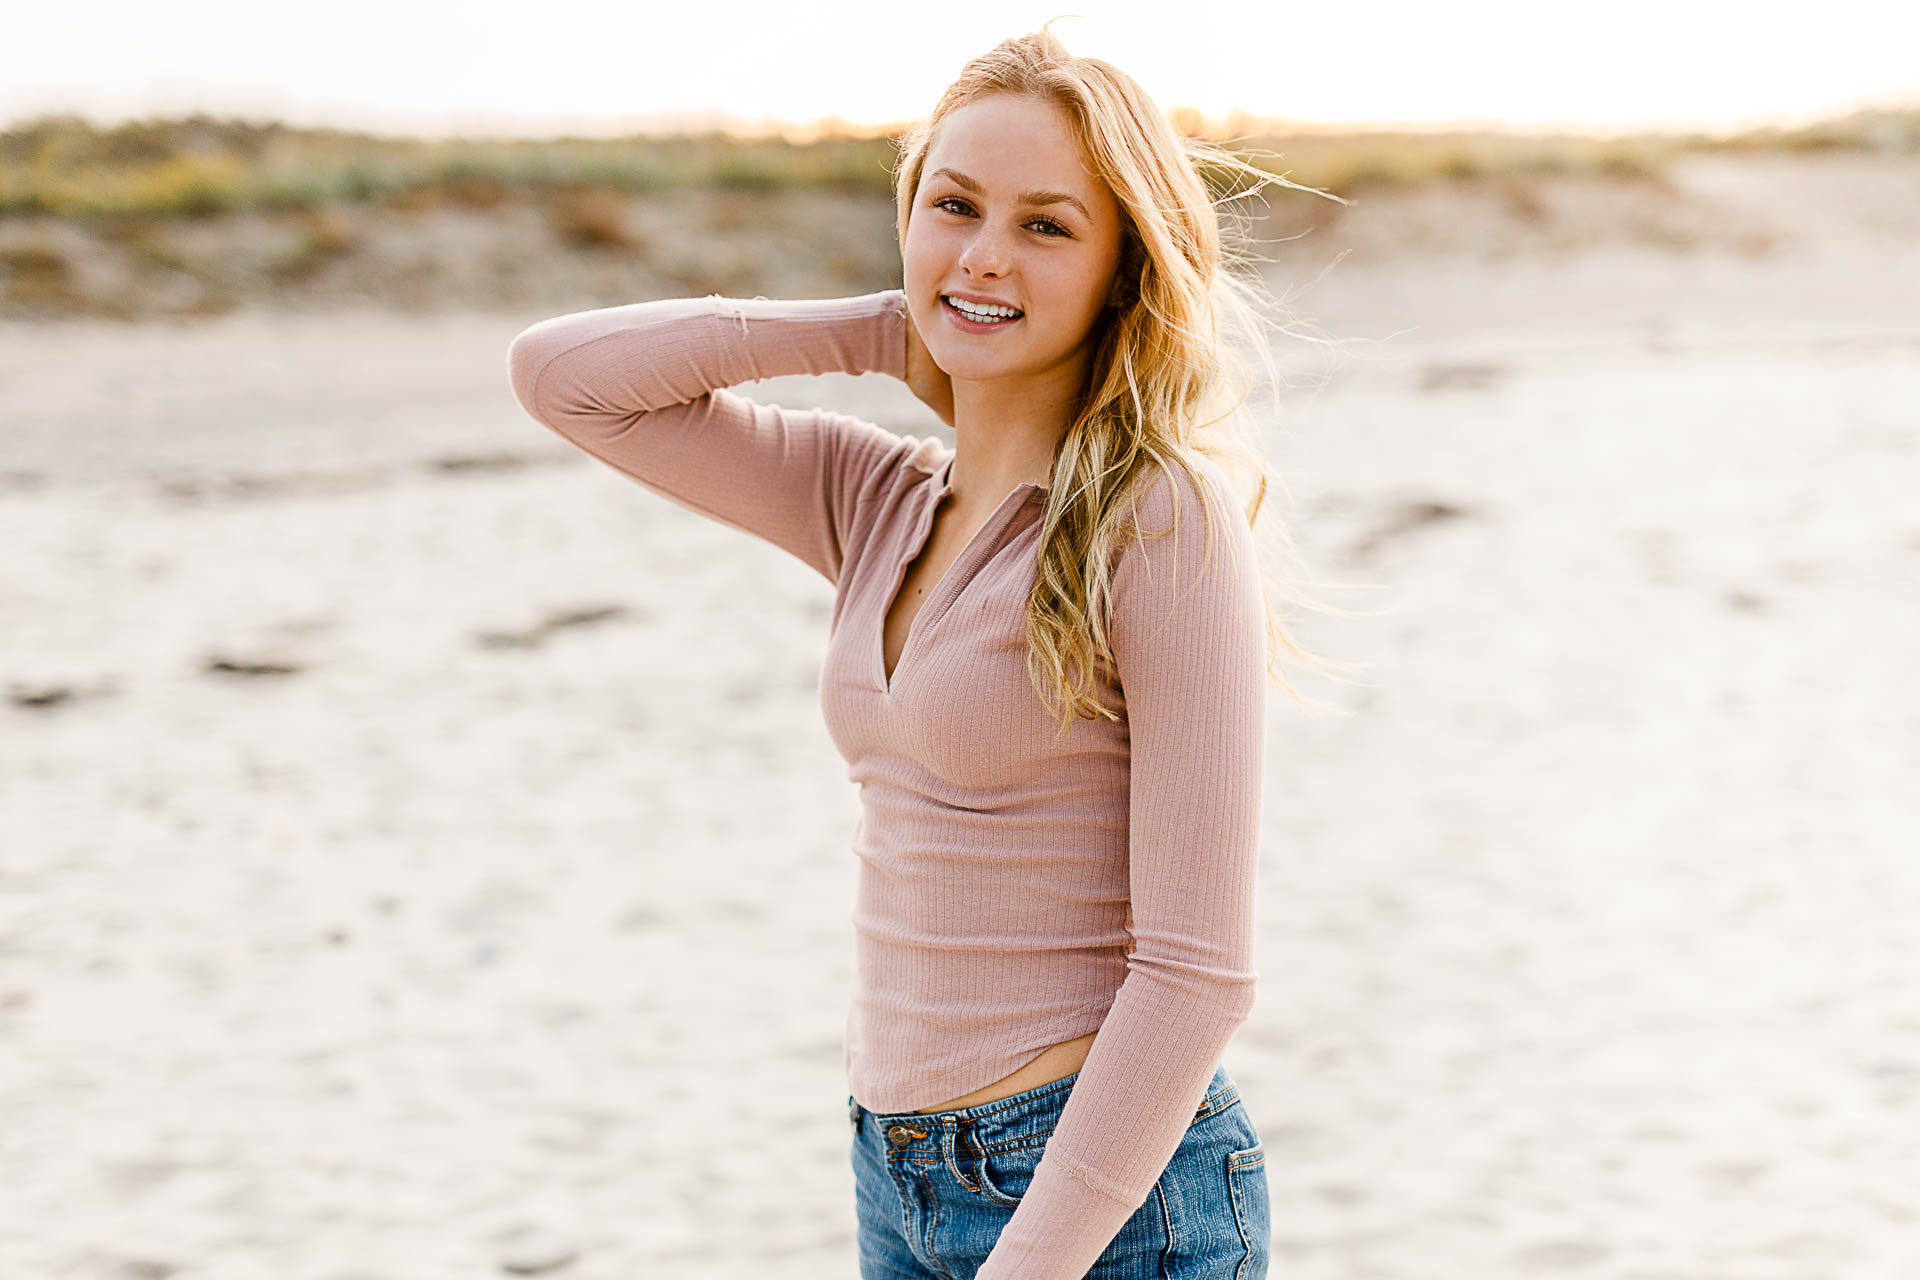 Photo by Plymouth Senior Portrait Photographer Christina Runnals | Girl sitting in the sand